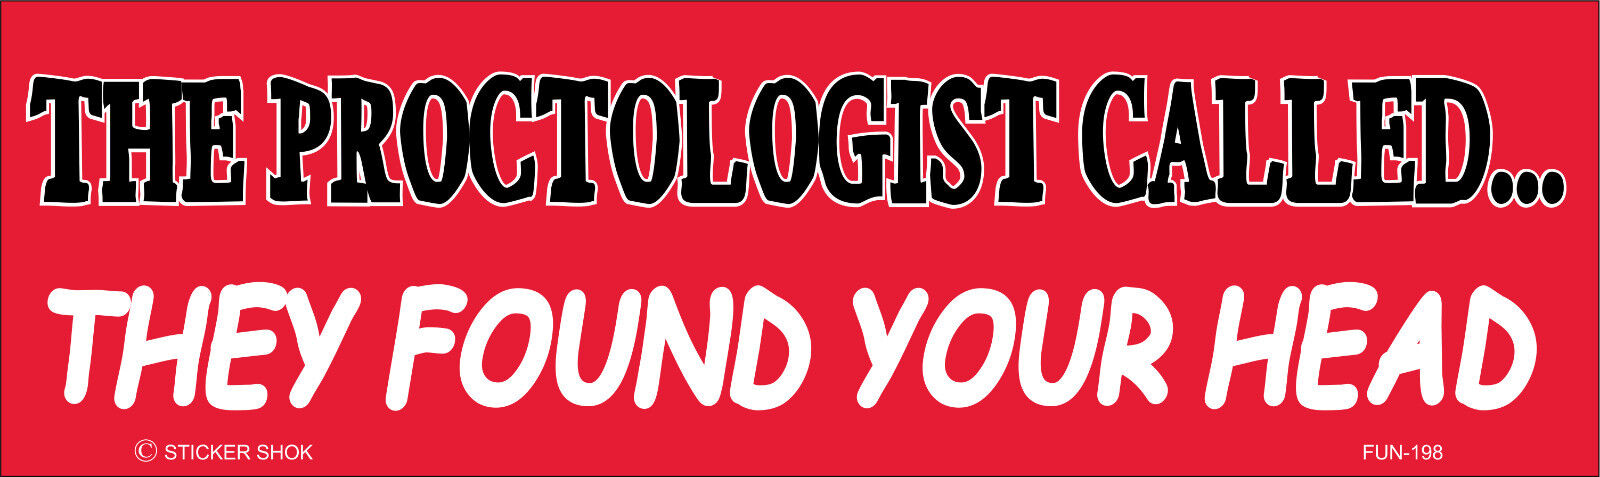 DECAL FUN198 THE PROCTOLOGIST CALLED...THEY FOUND YOUR HEAD 3